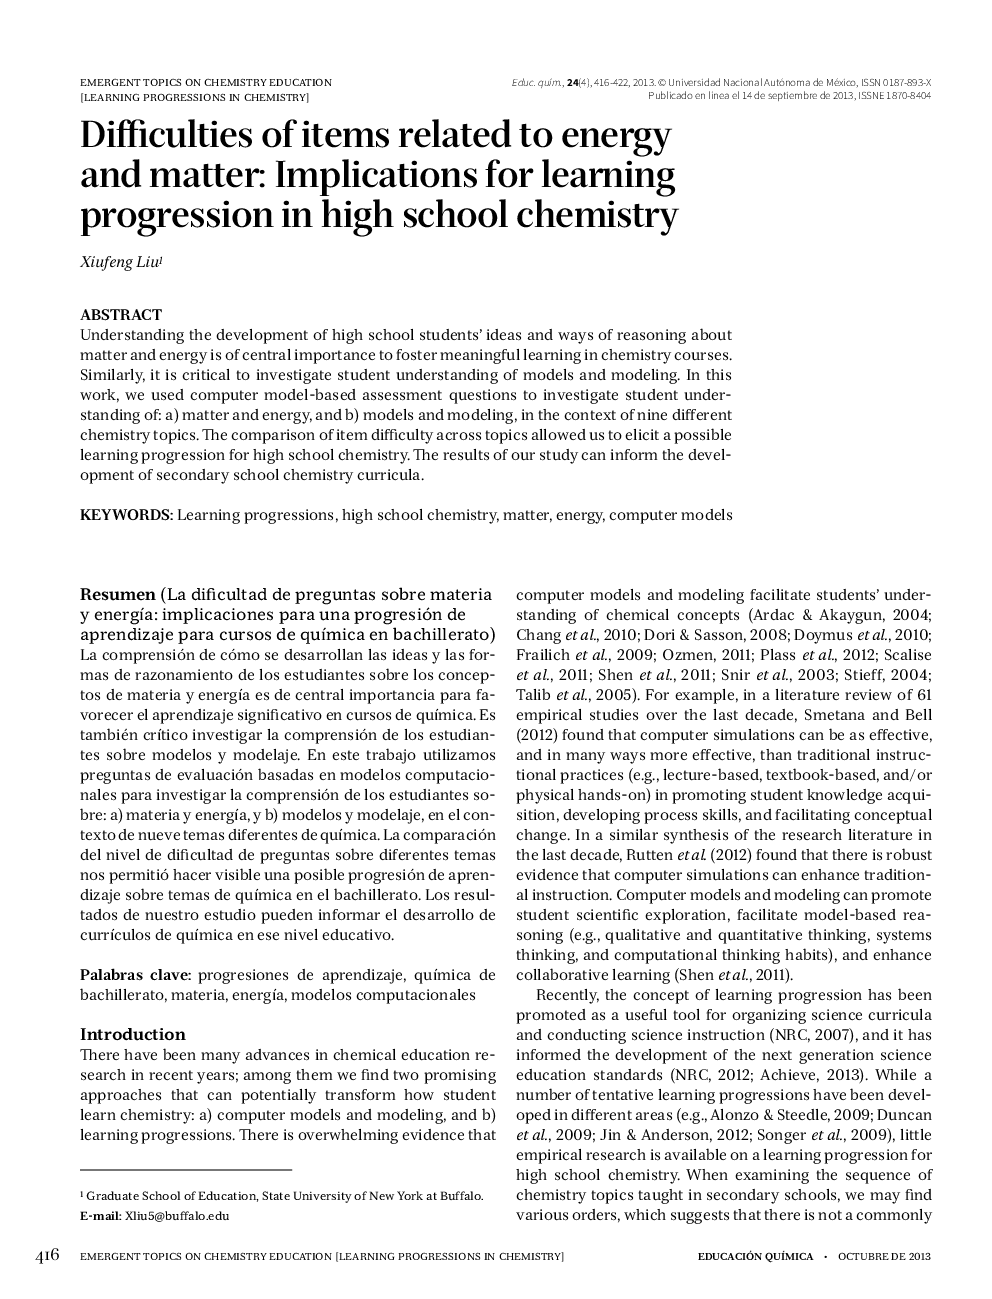 Difficulties of items related to energy and matter: Implications for learning progression in high school chemistry